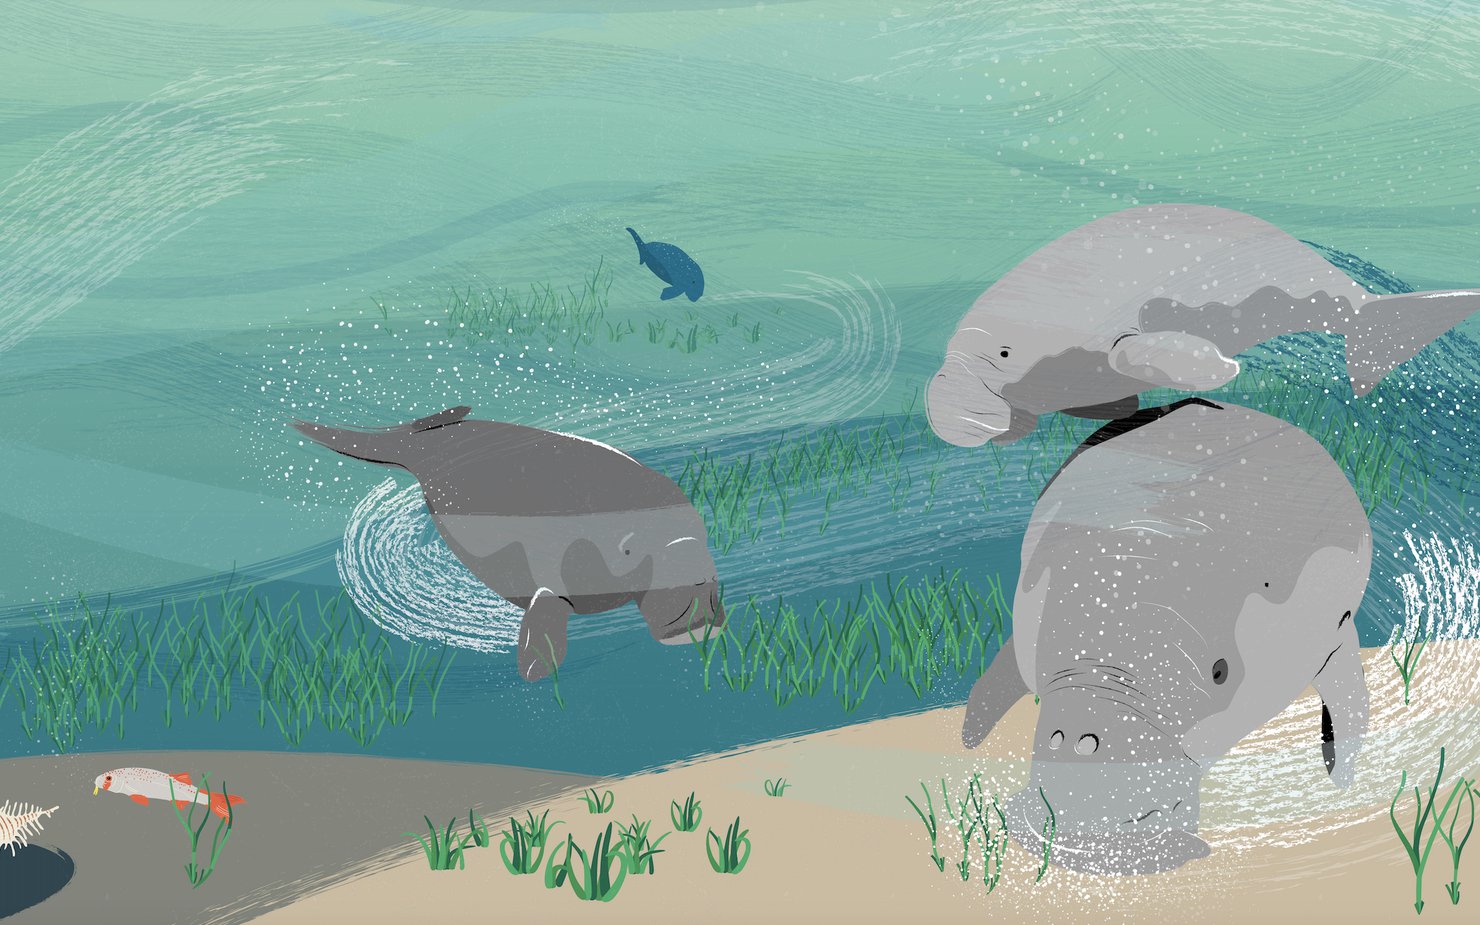 An illustration showing a group of dugongs swimming under the sea